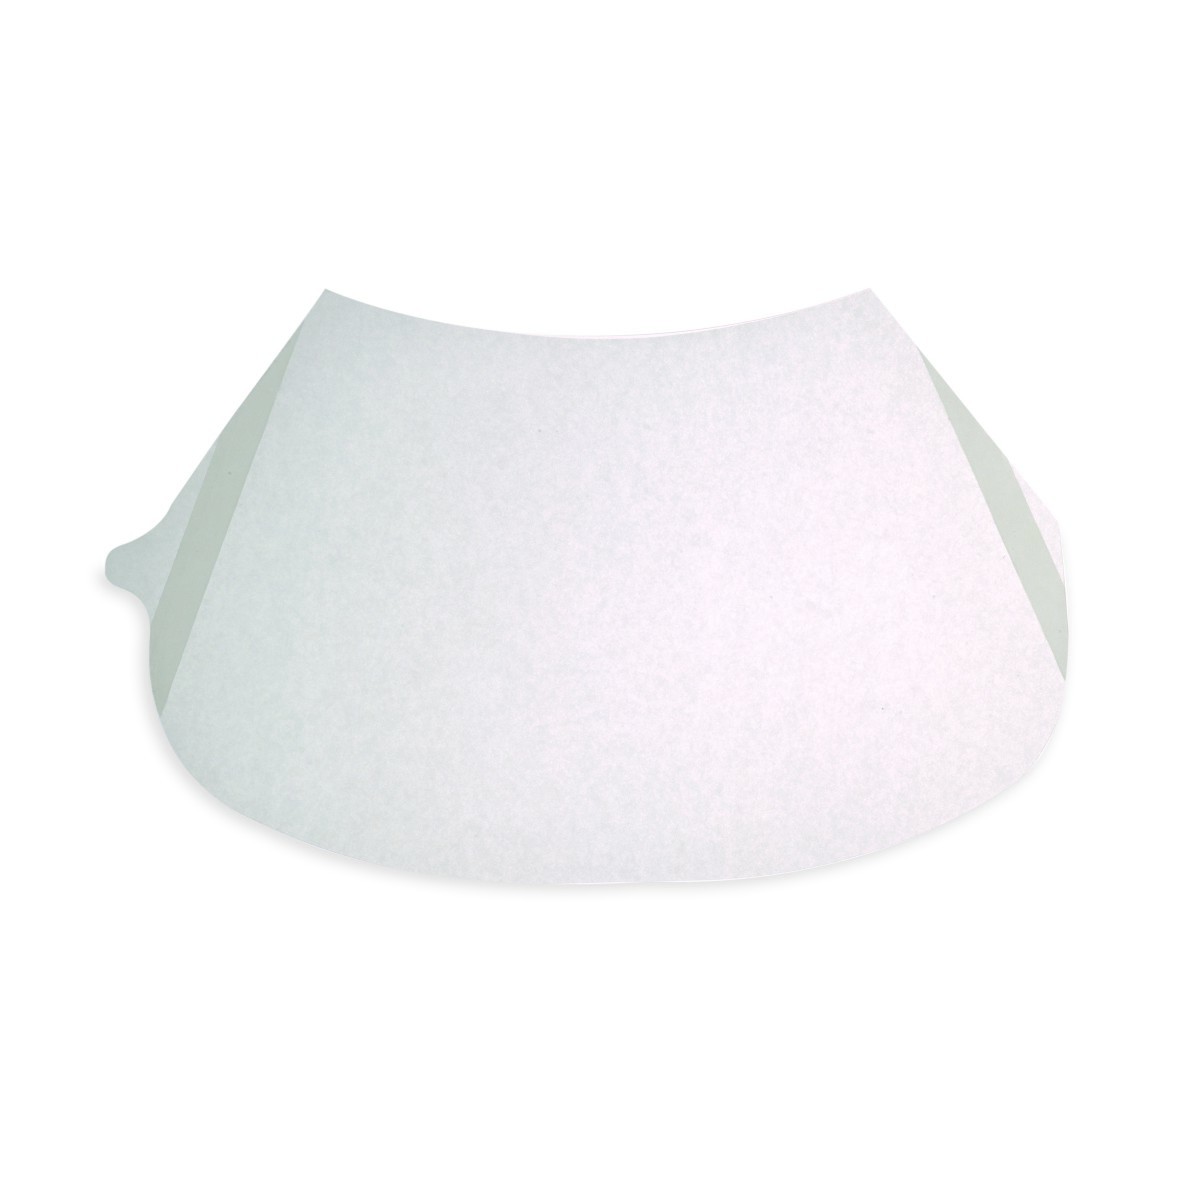 Honeywell Peel Away Lens Cover For Opti-Fit™ (Availability restrictions apply.)